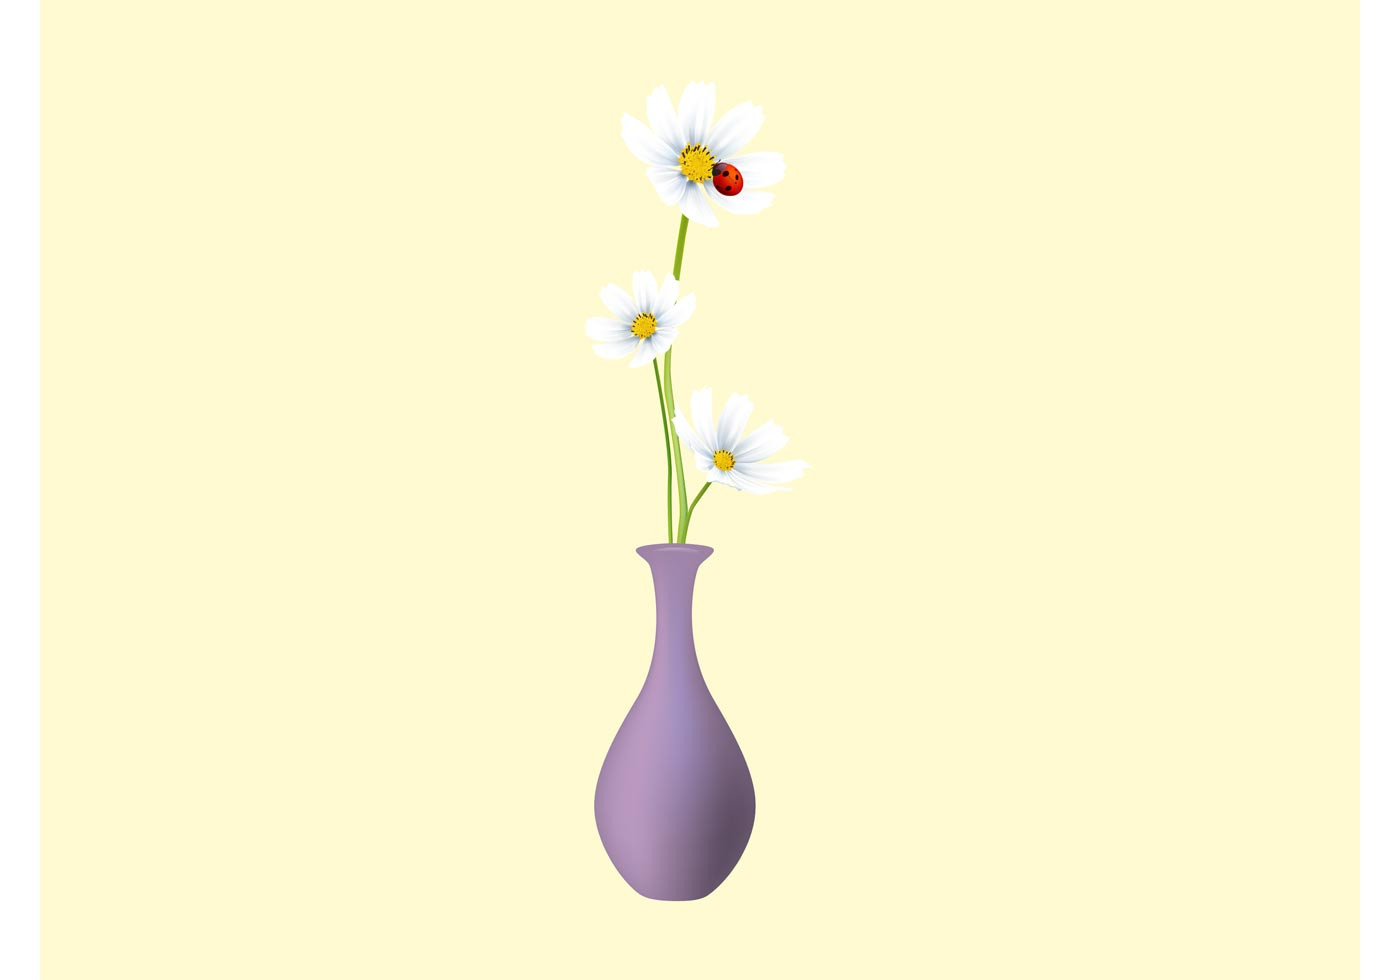 20 Cute New Beetle Flower Vase 2024 free download new beetle flower vase of daisy vase download free vector art stock graphics images with regard to daisy vase vector